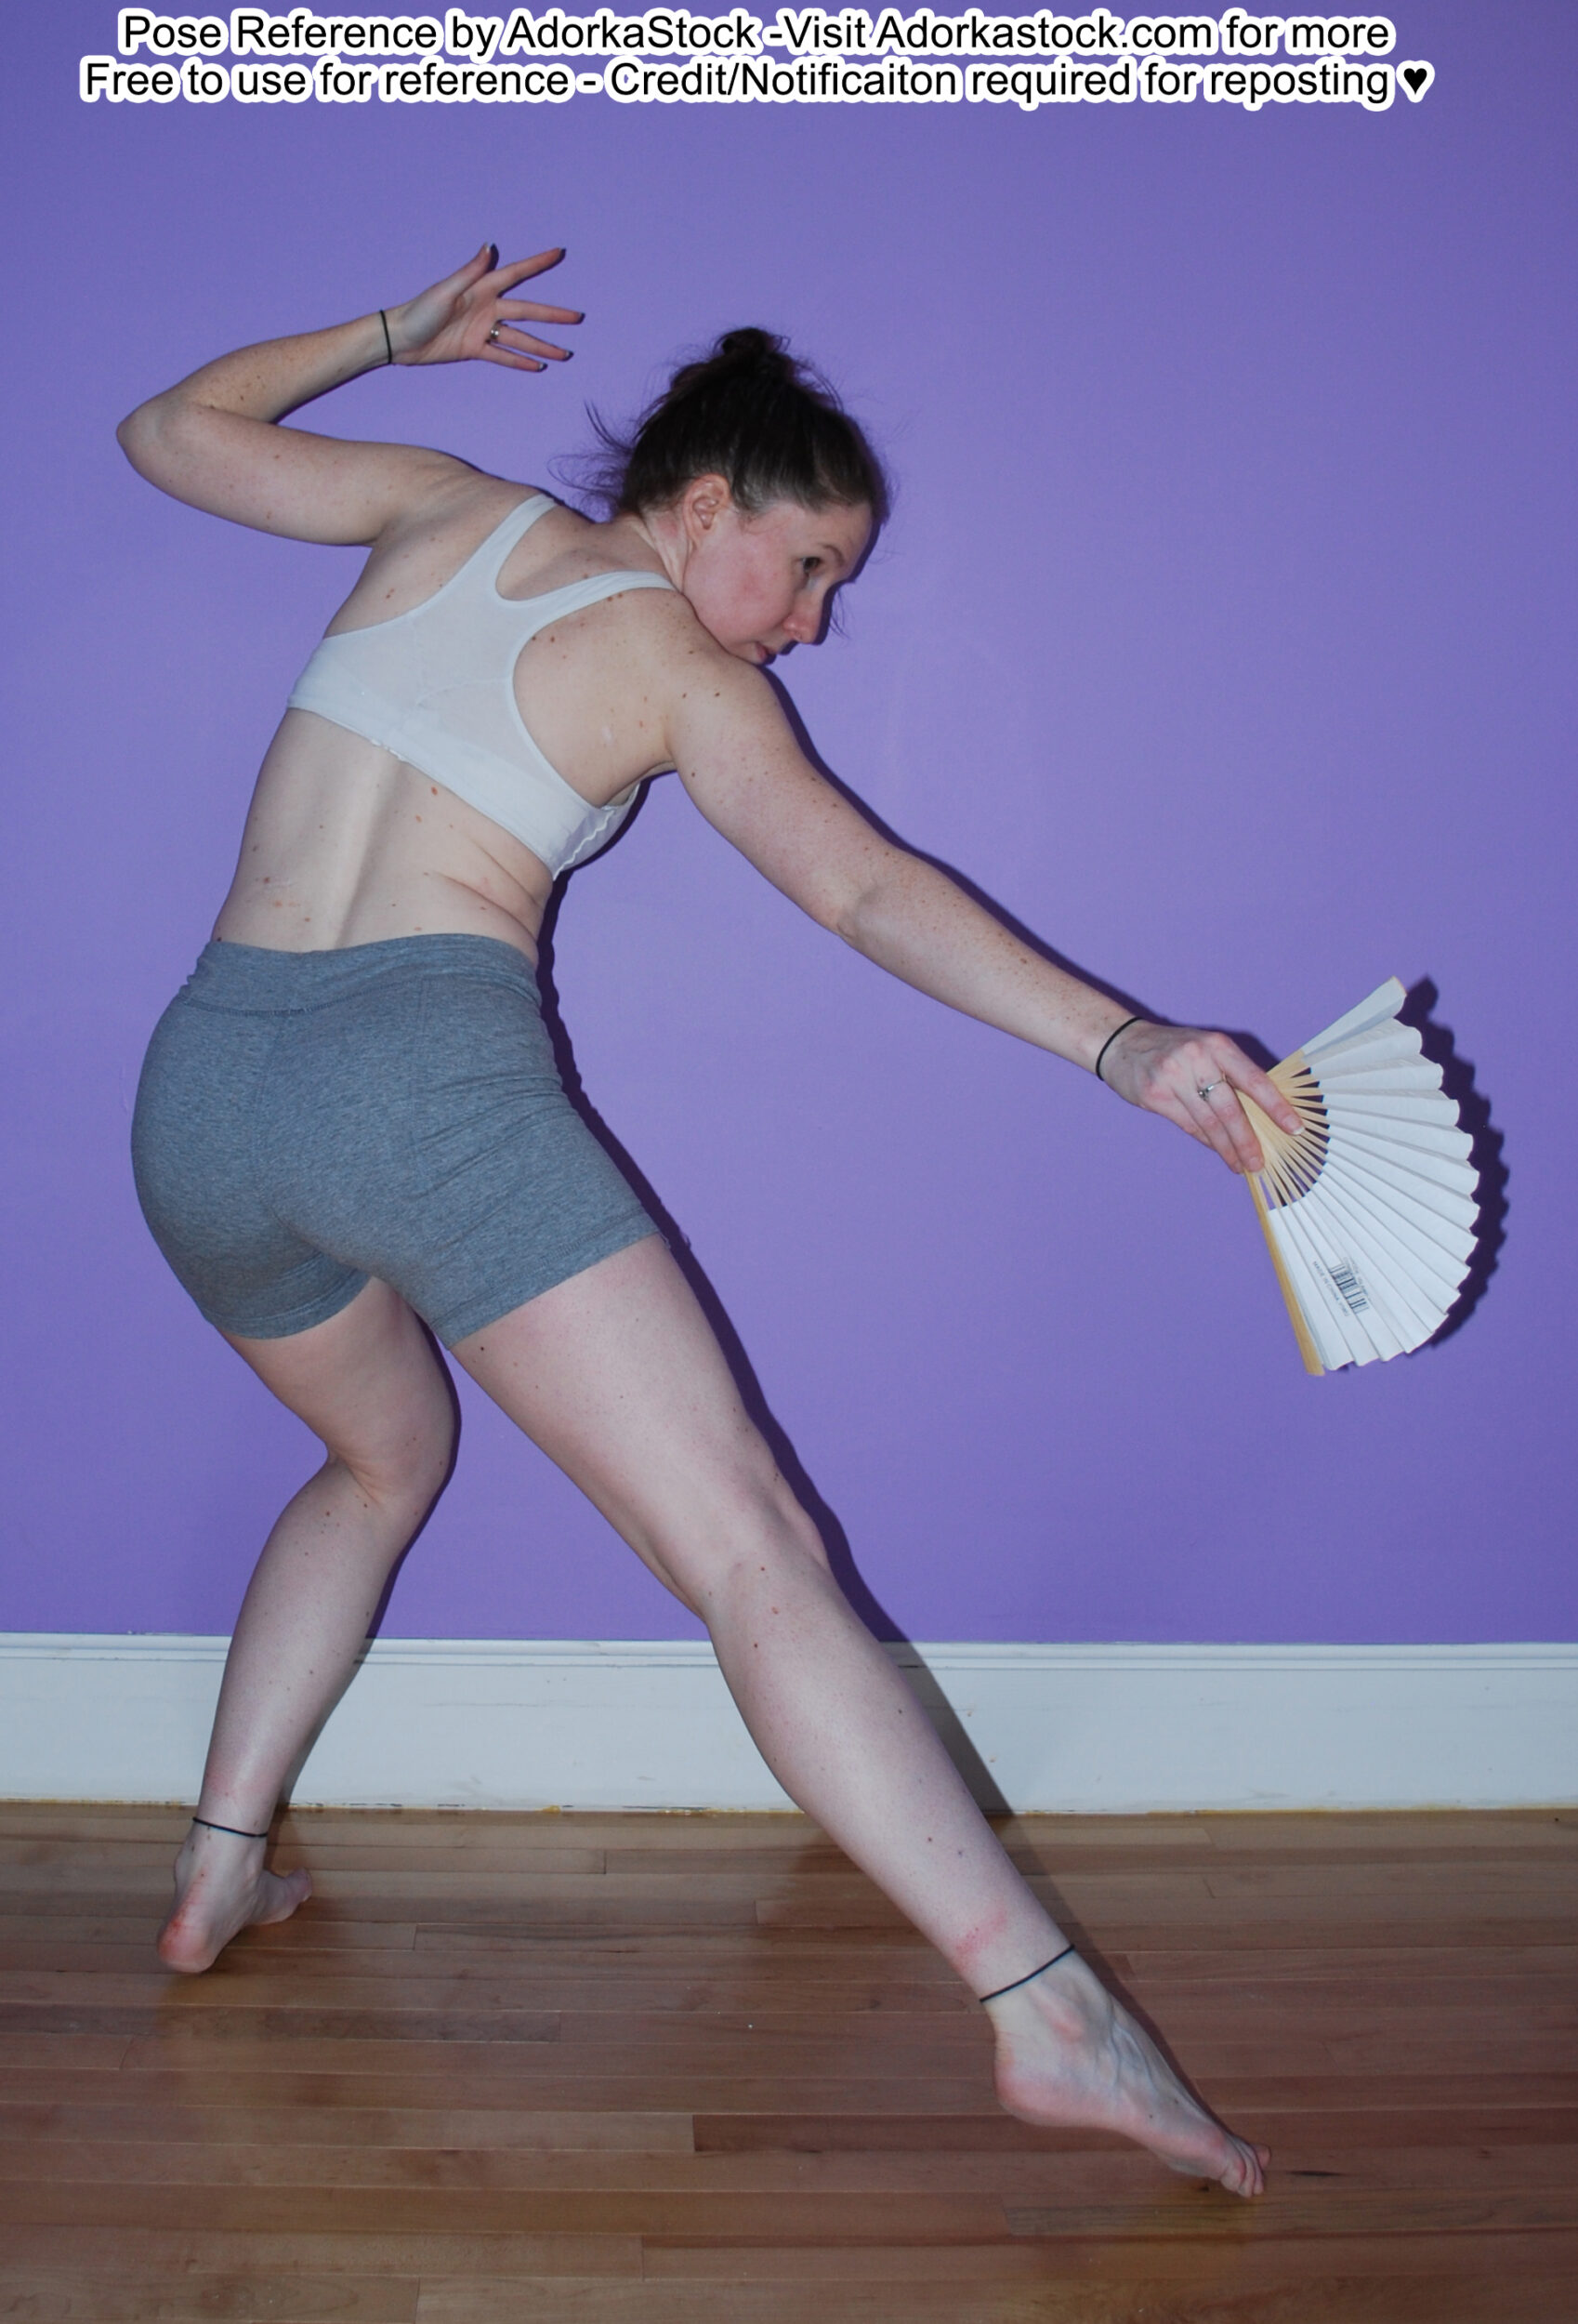 Thin, white, female pose reference model in ack facing dynamic lunge pose with a fan held out to the side, the other arm raised.